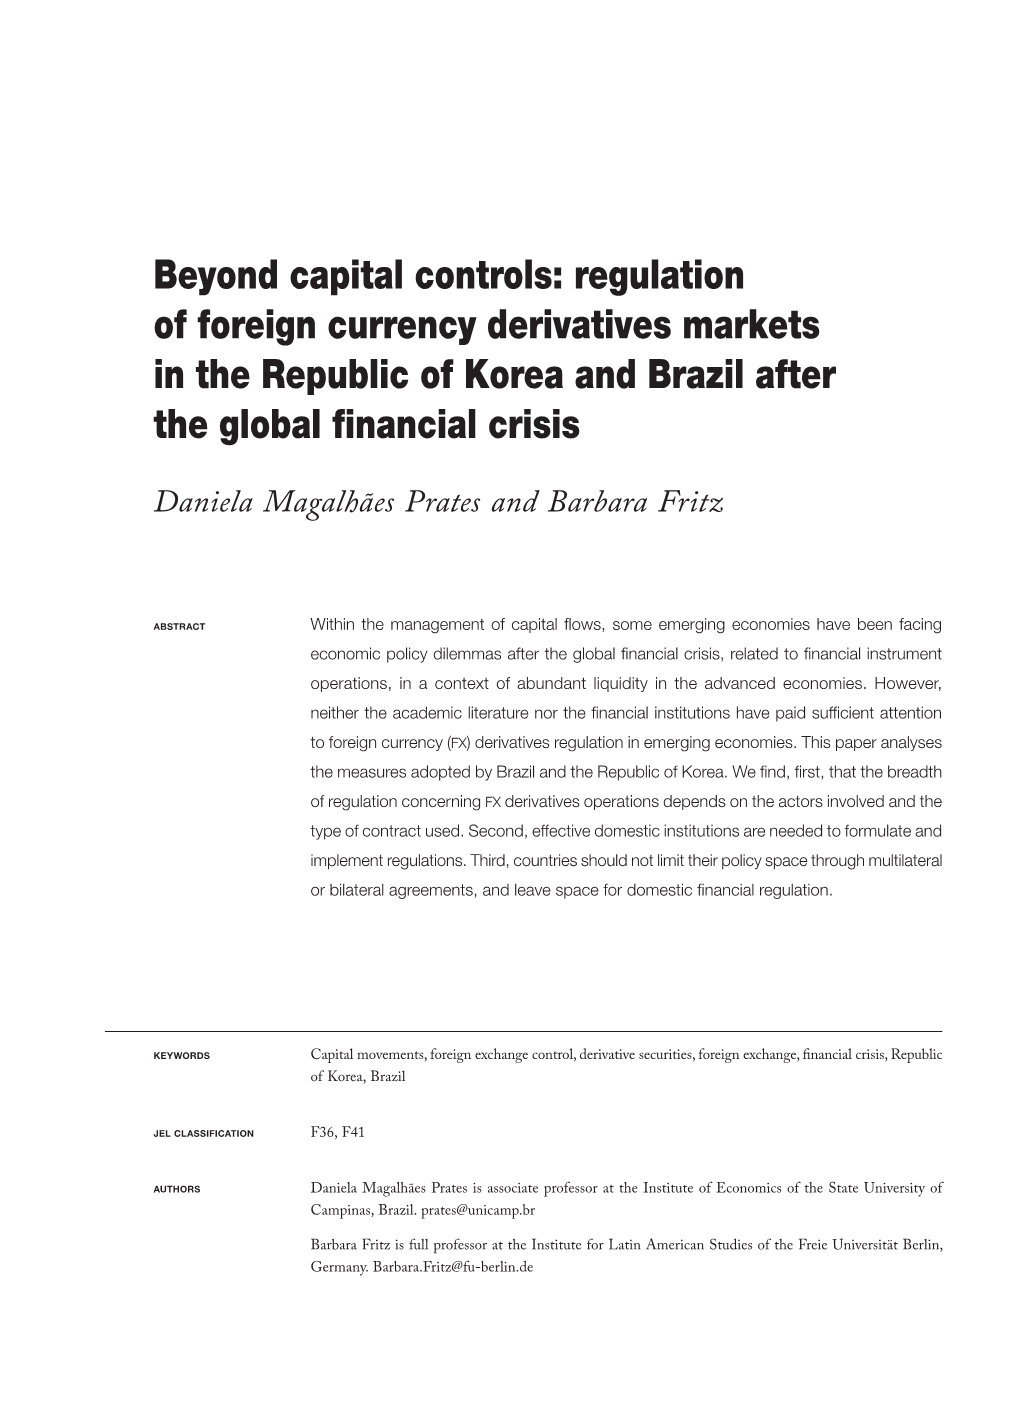 Beyond Capital Controls: Regulation of Foreign Currency Derivatives Markets in the Republic of Korea and Brazil After the Global Financial Crisis